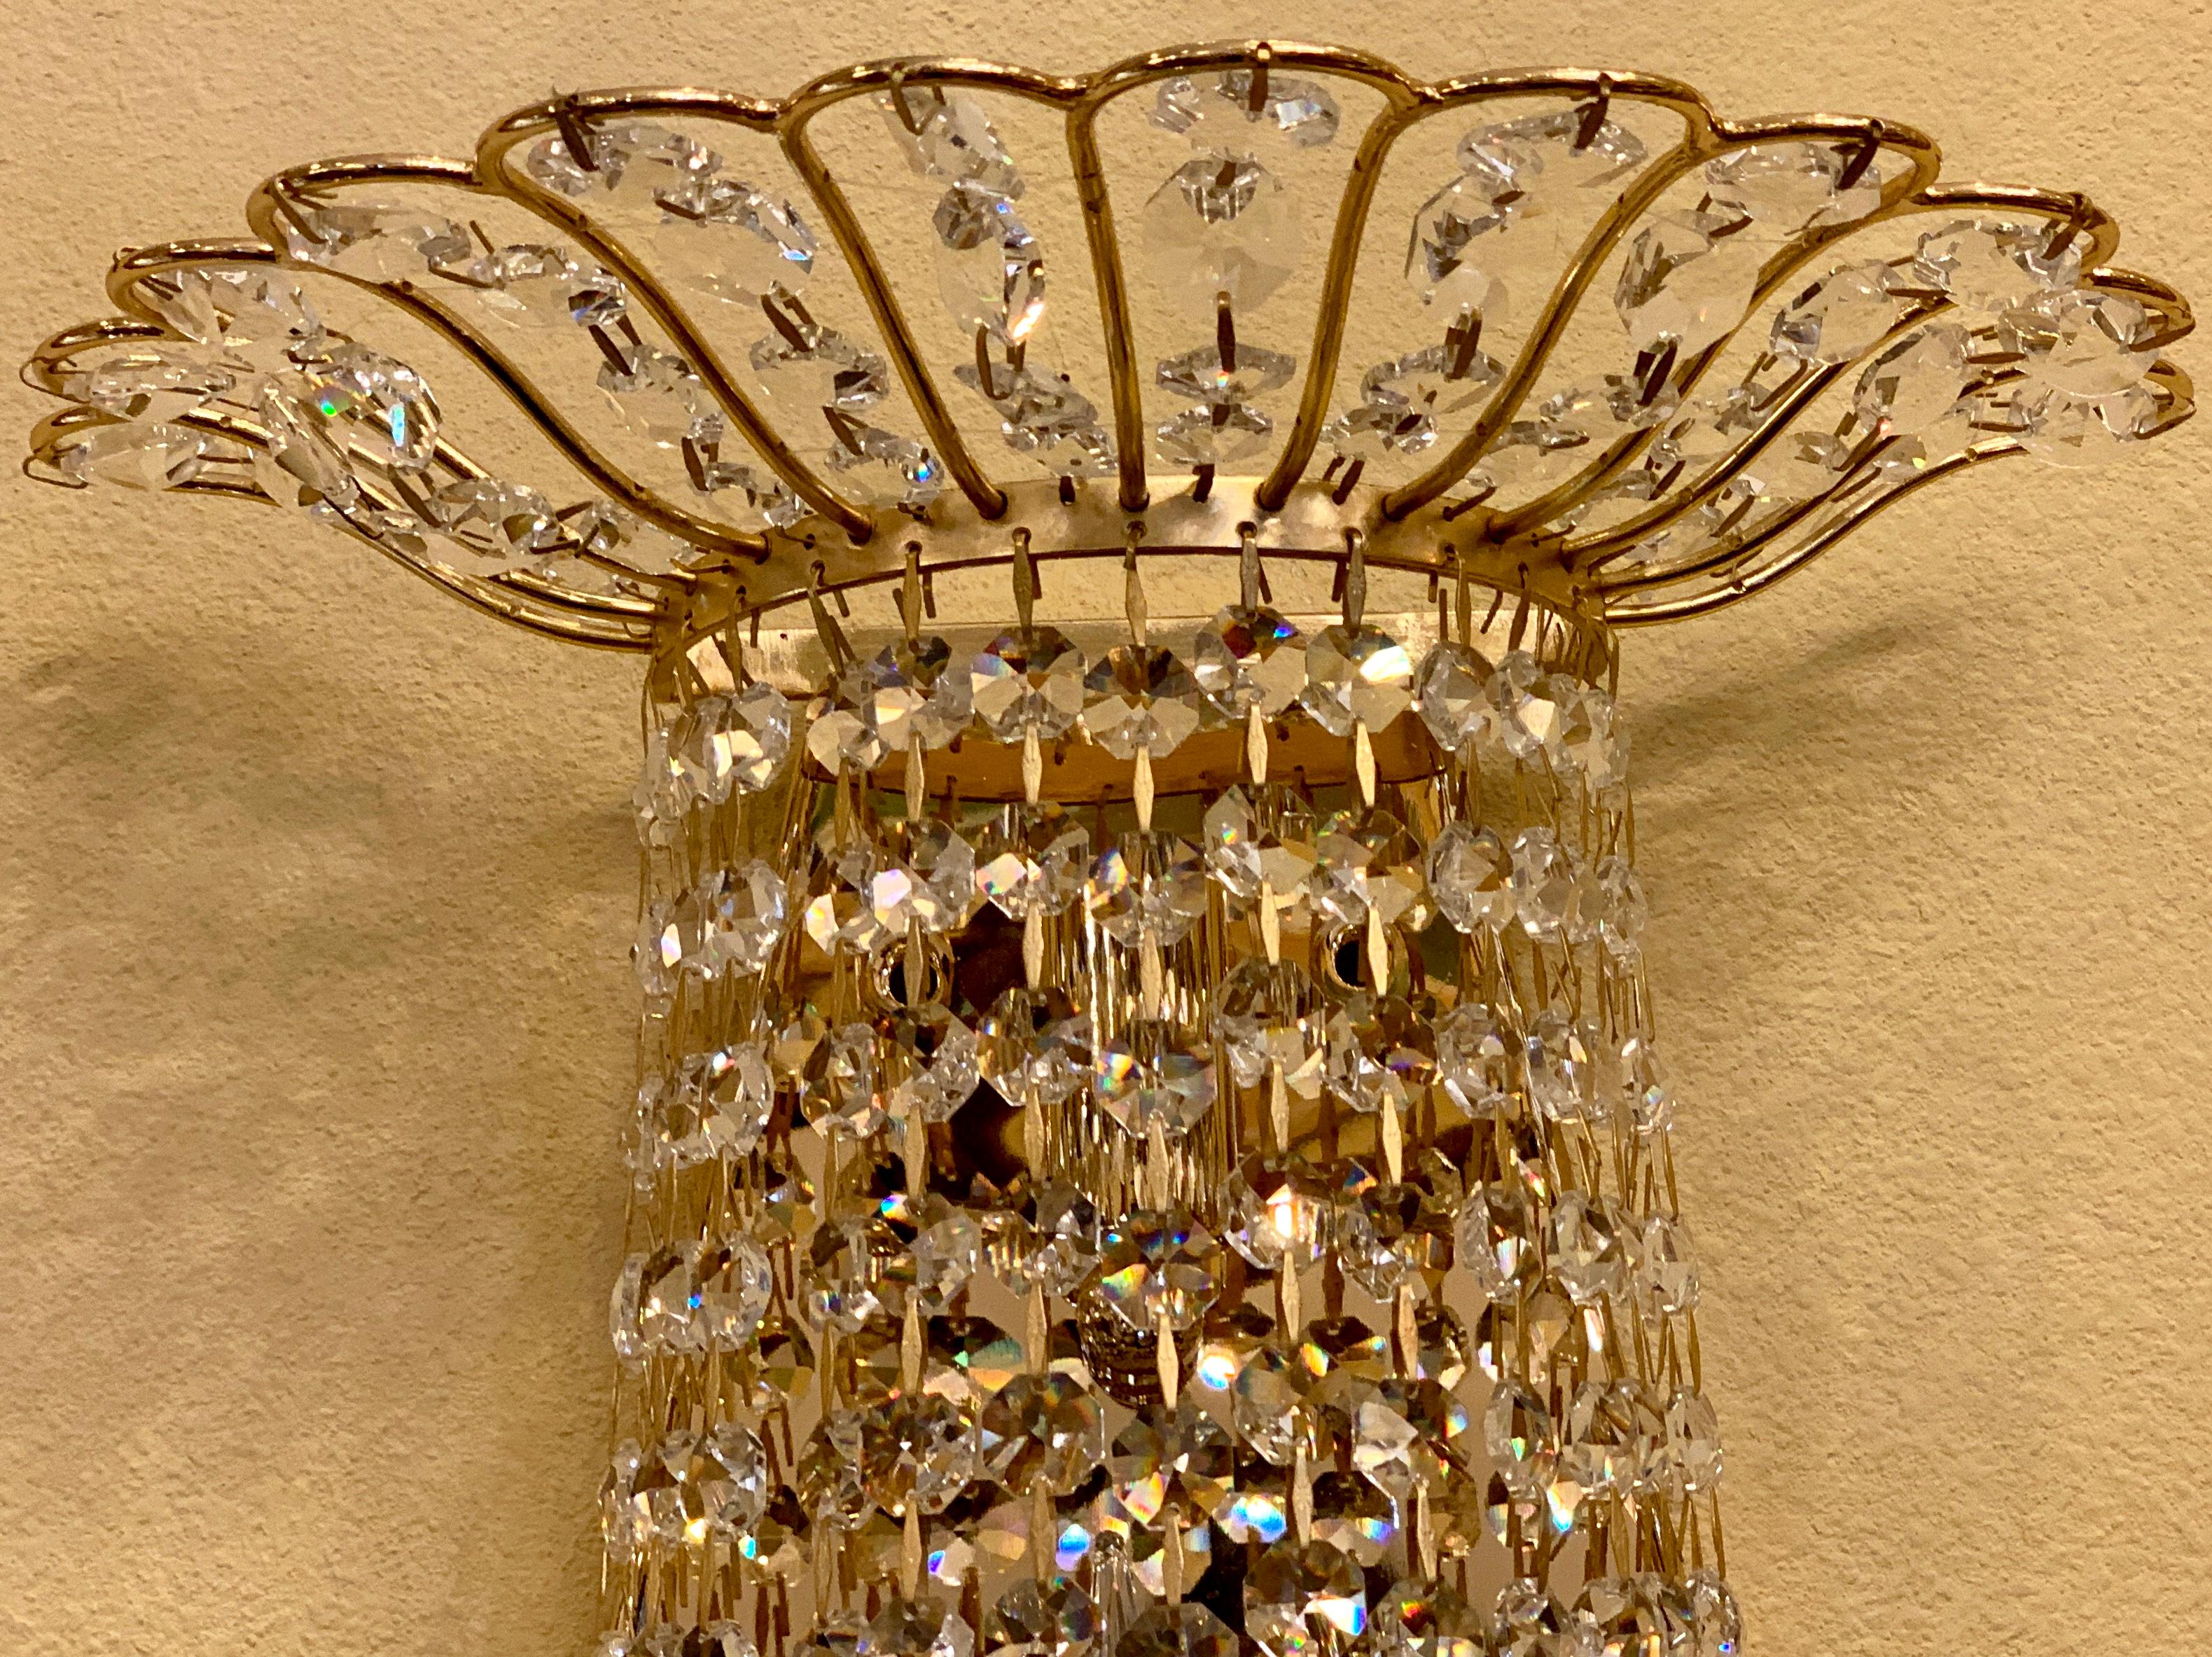 Large and elegantly shaped, rounded light sconce or wall chandelier has a shiny gold metal basket style frame with scalloped edges and is lavishly draped with sparkling, faceted, octagonal crystal beads for a dazzling effect. The bottom is finished